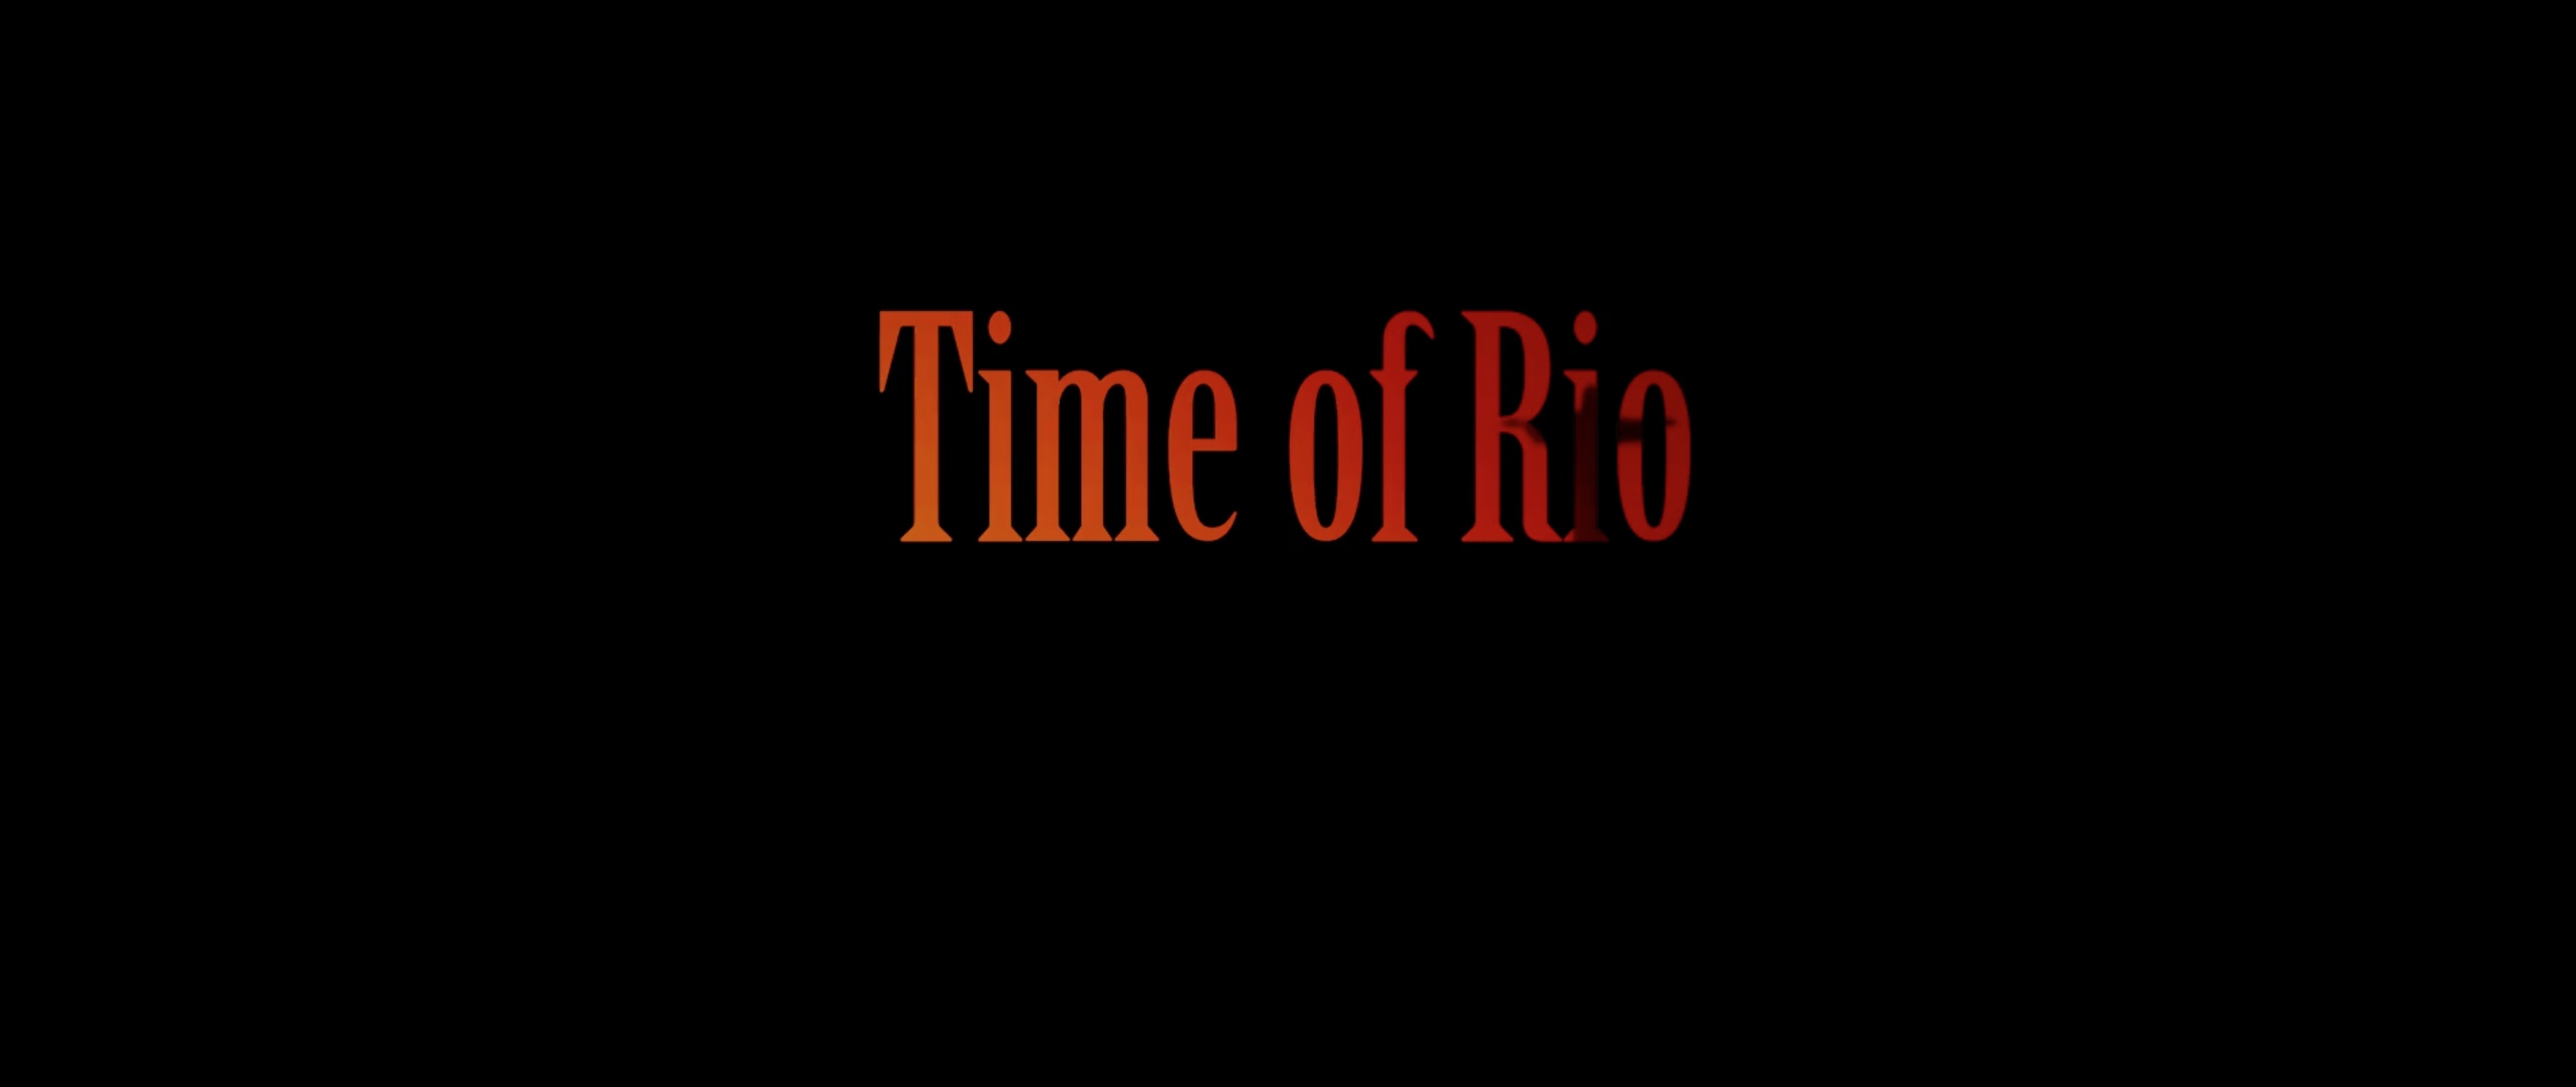 Video Time Of Rio